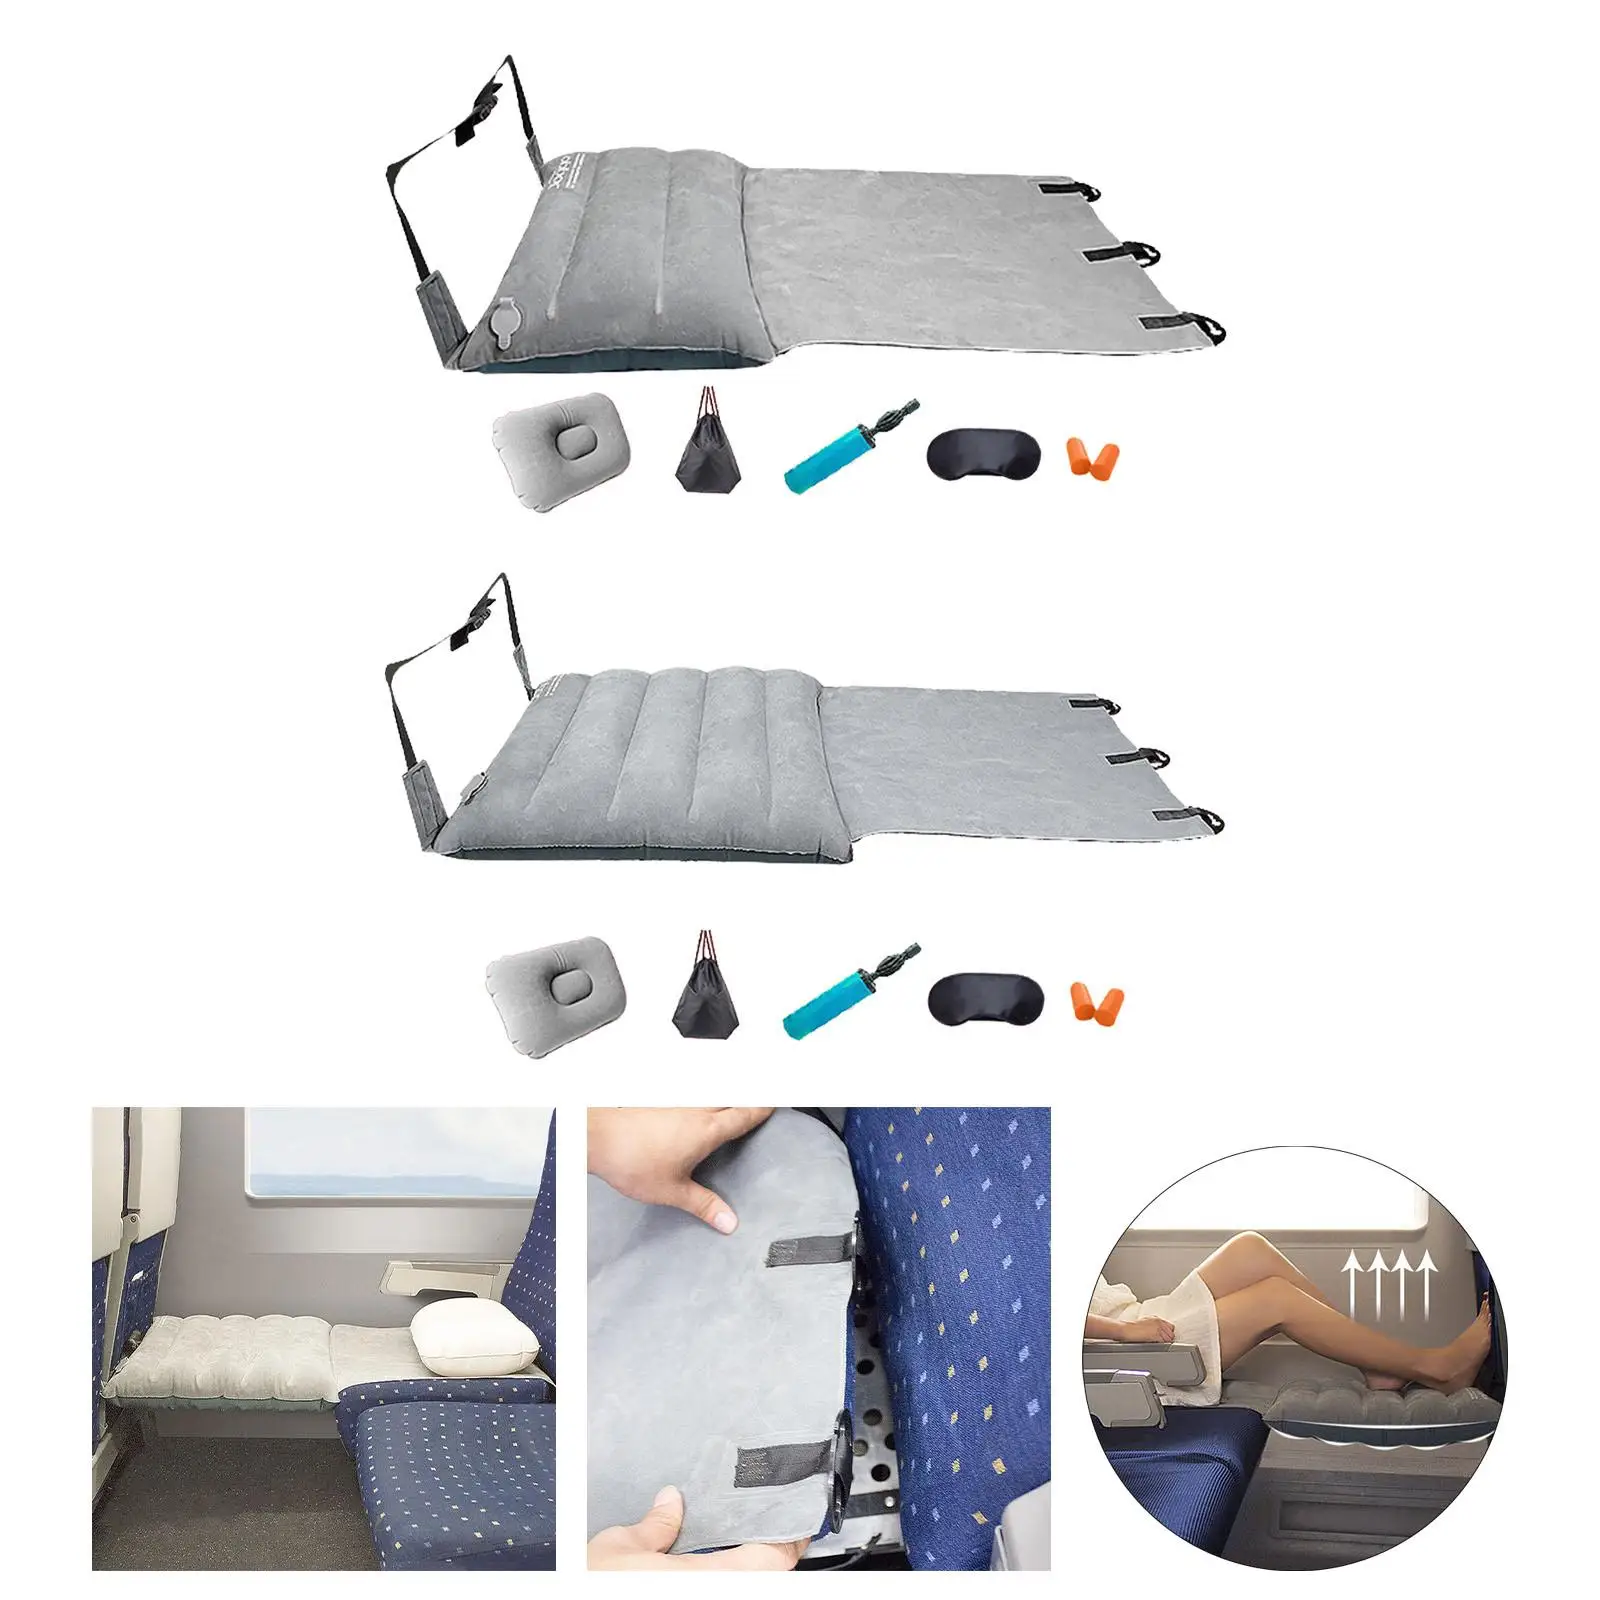 Airplane Footrest Hammock for Kids Inflatable Elevate Legs Strong Load Bearing Flights Travel Foot Rest Plane Seat Extender